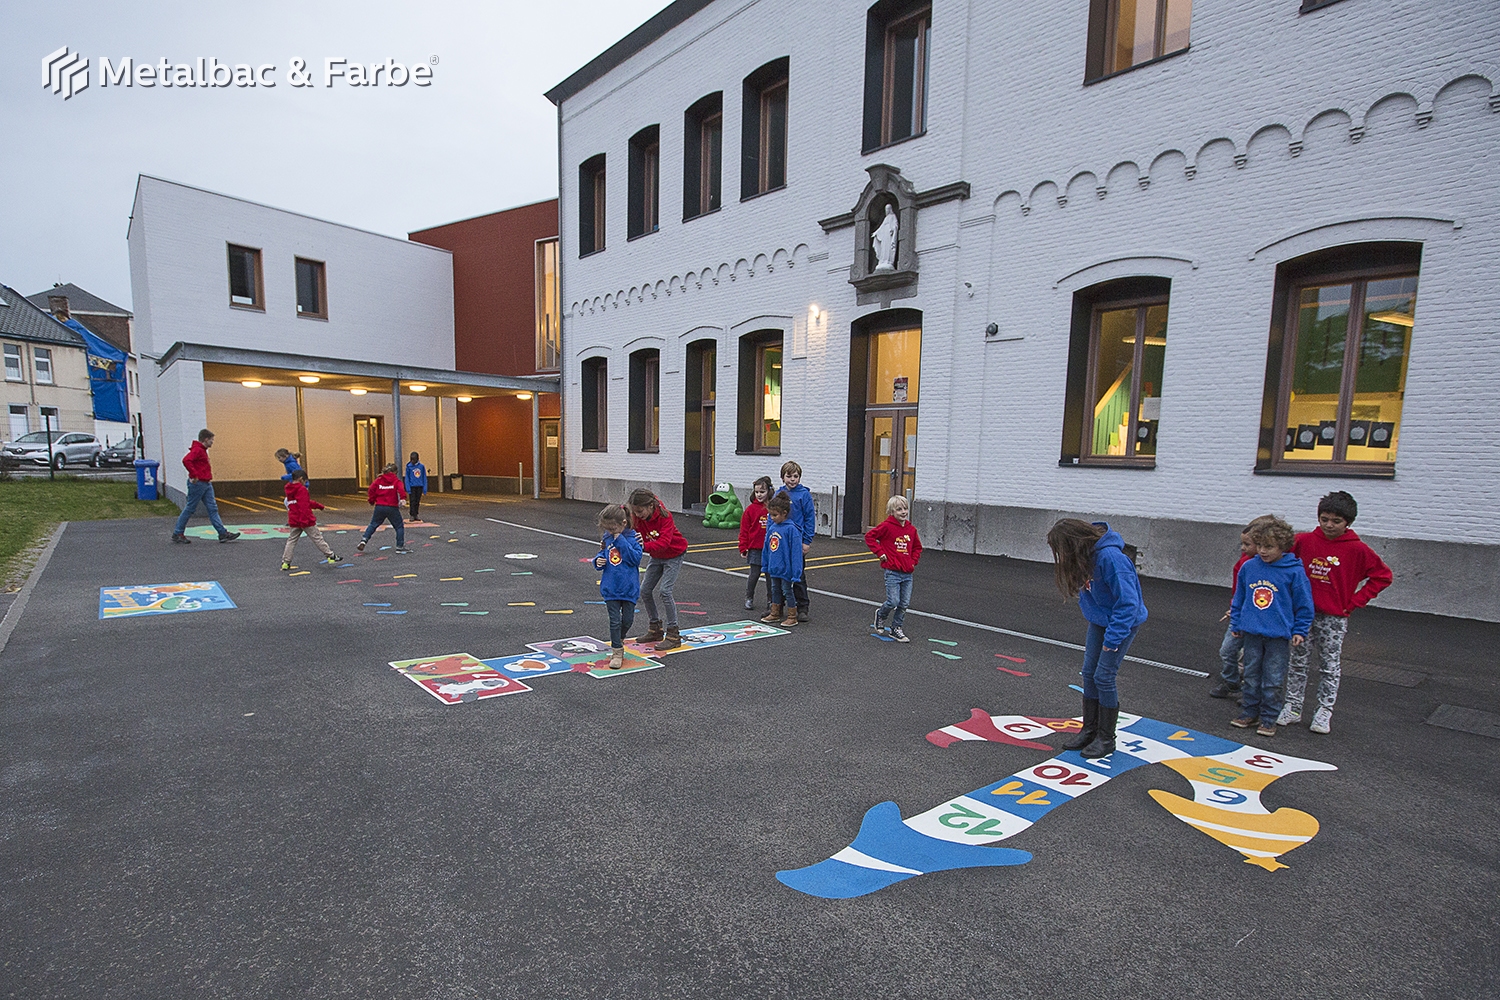 playground markings games; playground games for kids; outdoor play; math games; school yard games; educational games; asphalt games; interactive games; road markings signs; road traffic signs; crocodile games; hopscotch game; logical games